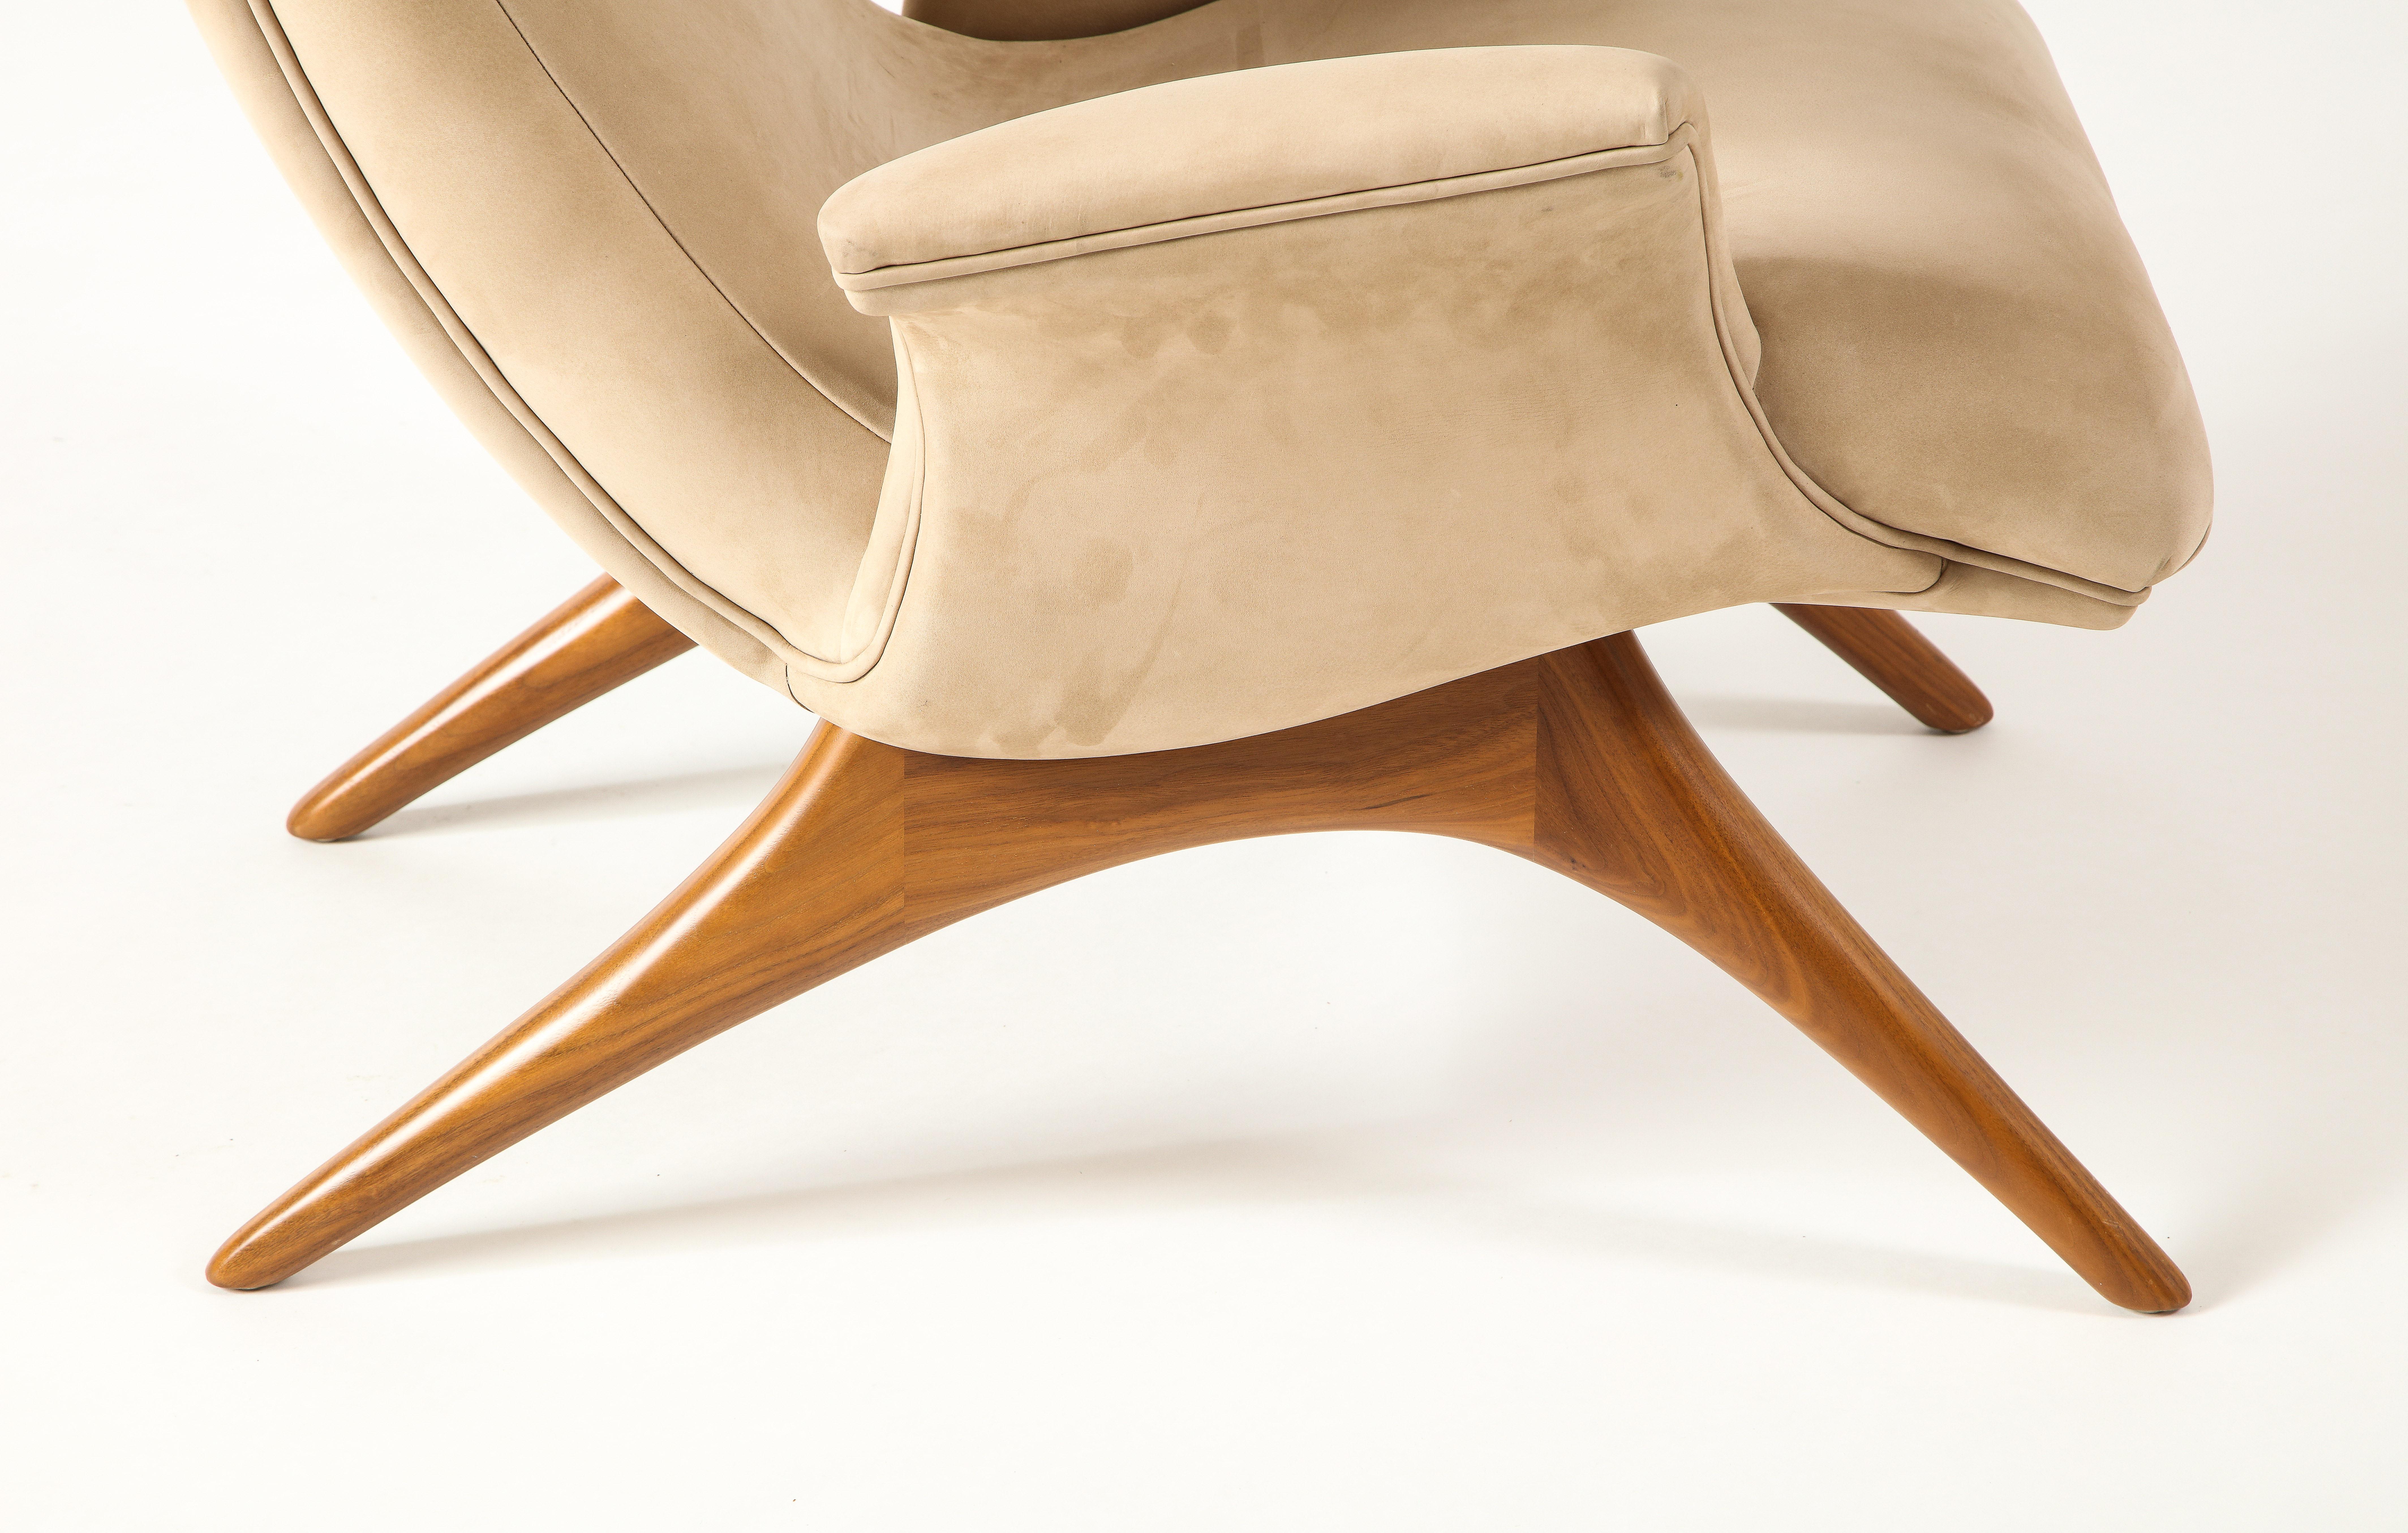 Vladimir Kagan Ondine Chair with Sueded Leather Upholstery & Natural Walnut Base 9